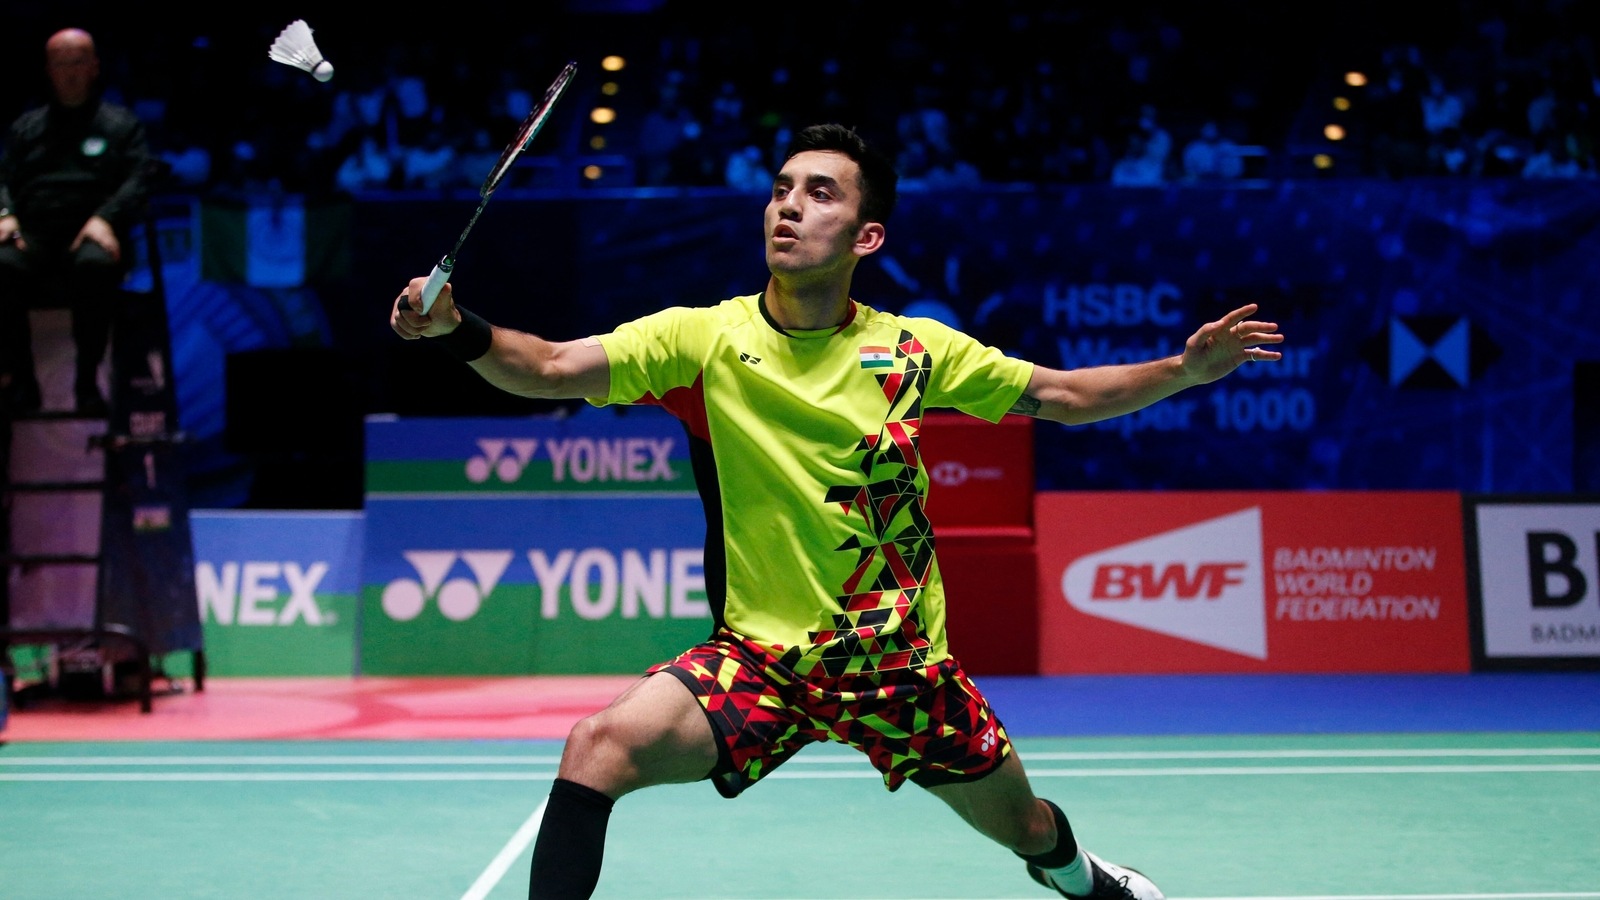 All England Cships Lakshya Sen finishes runner-up; loses to Axelsen in final